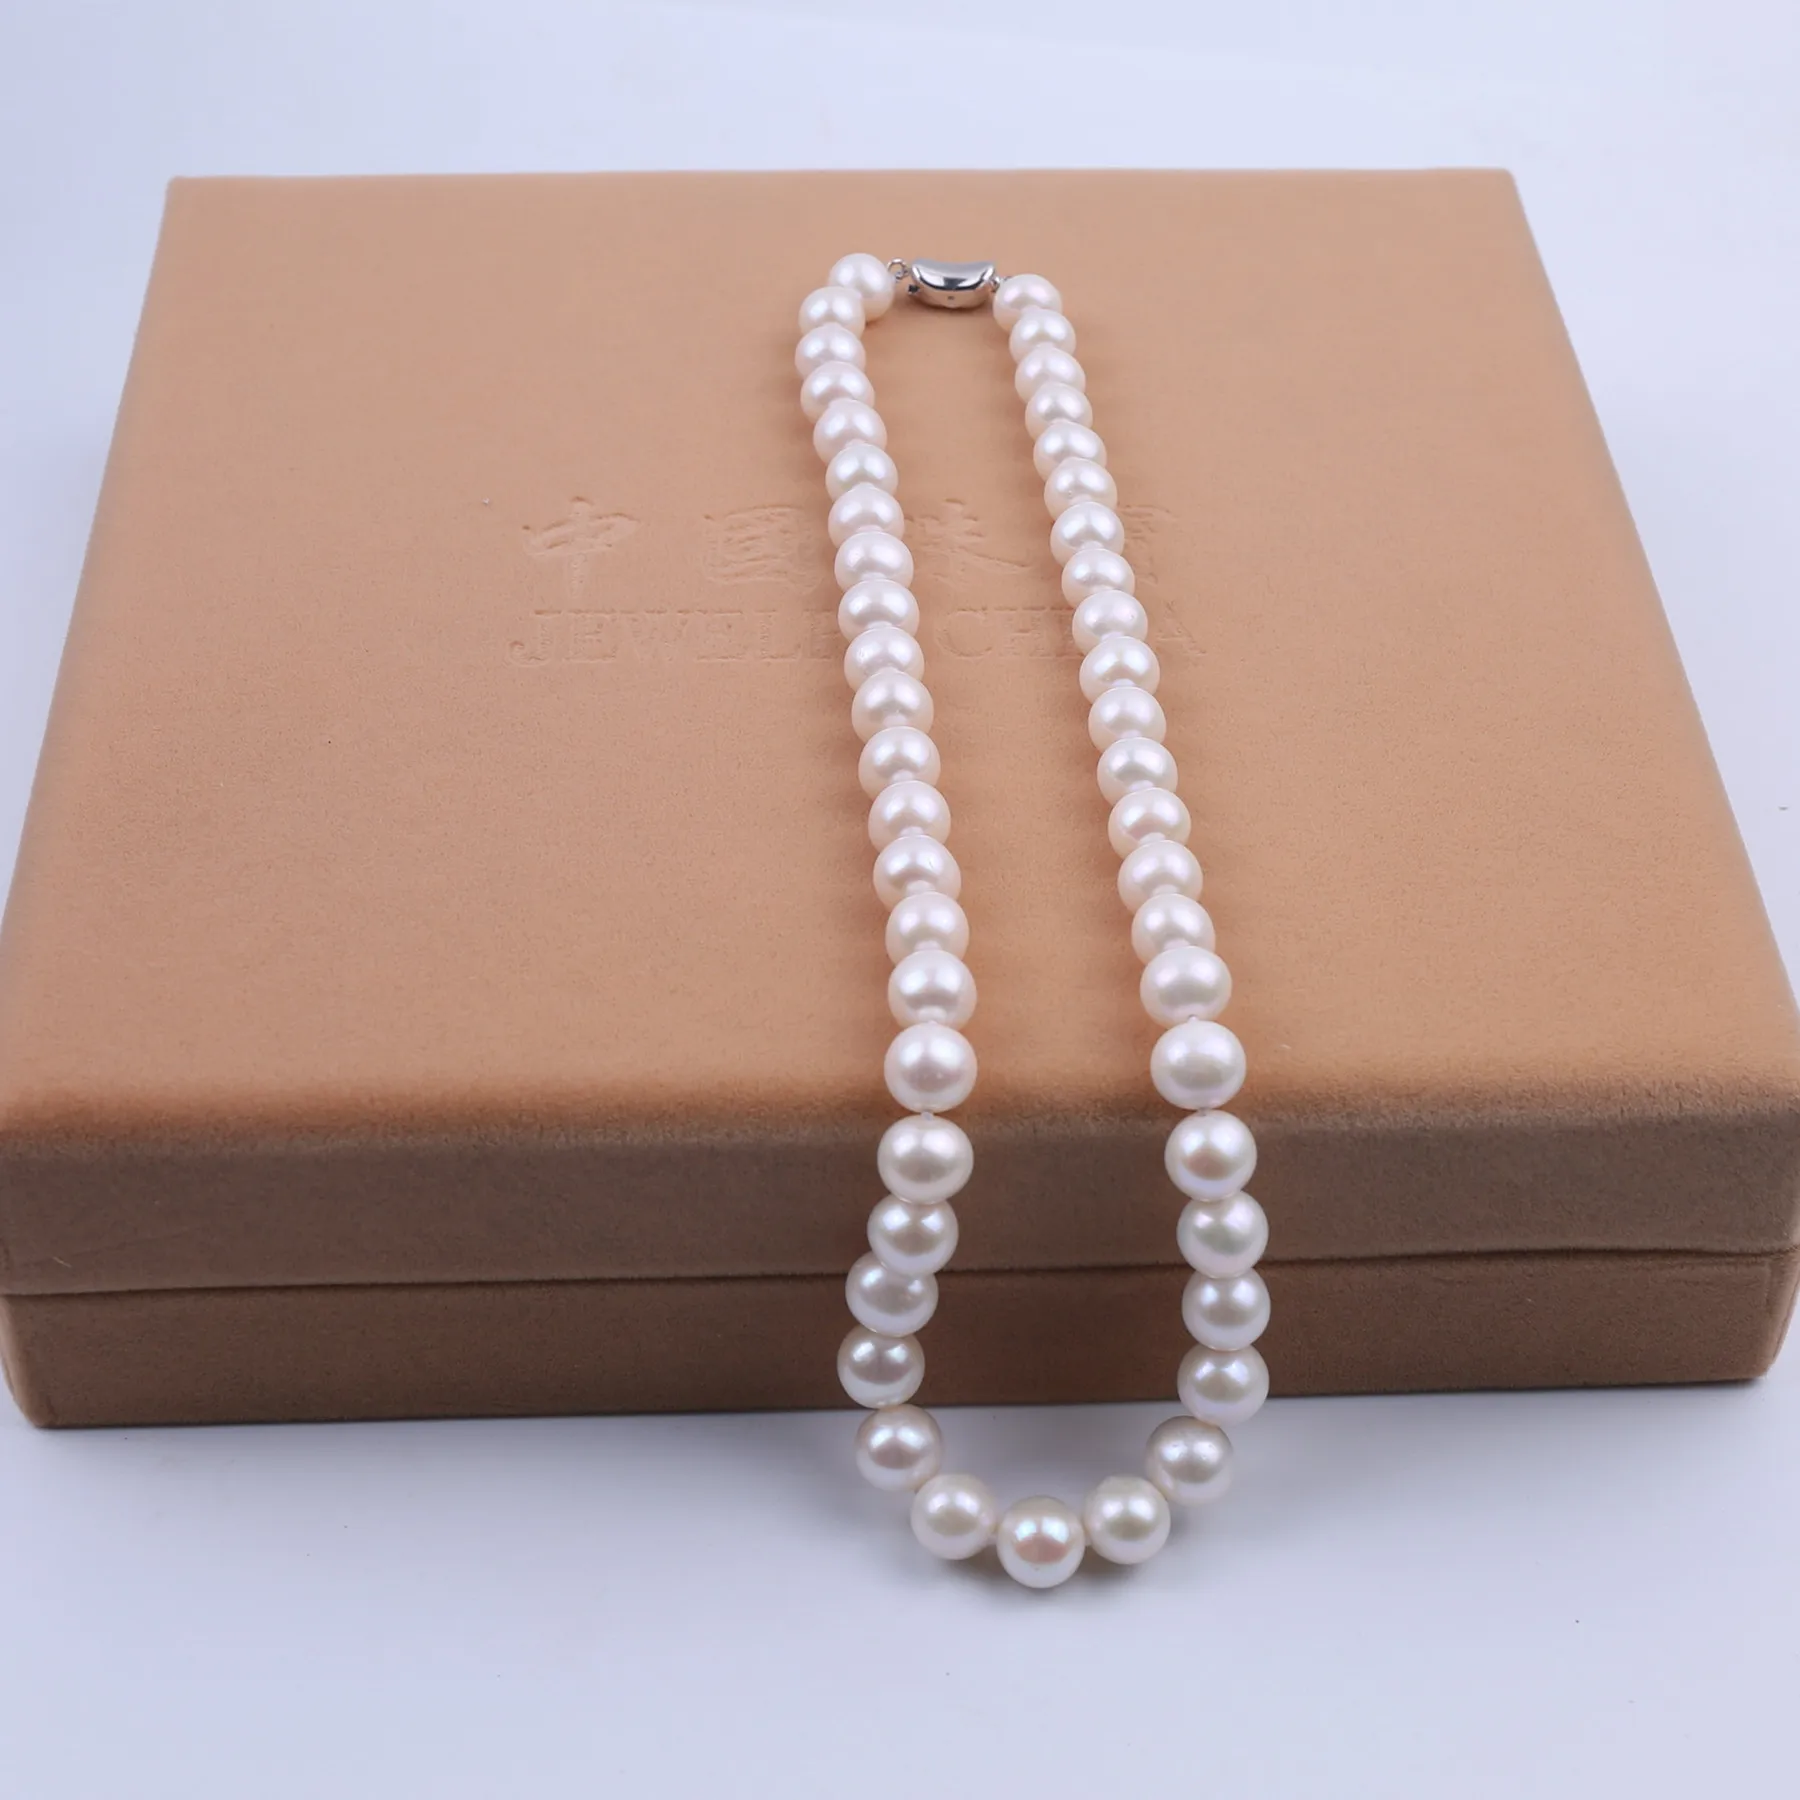 

ZZDIY047 Wholesale Freshwater Pearl Necklace 5.0-6.0Mm Round Aaa1 Fresh Water Pearl Strand Necklace Pearl Manufacturers